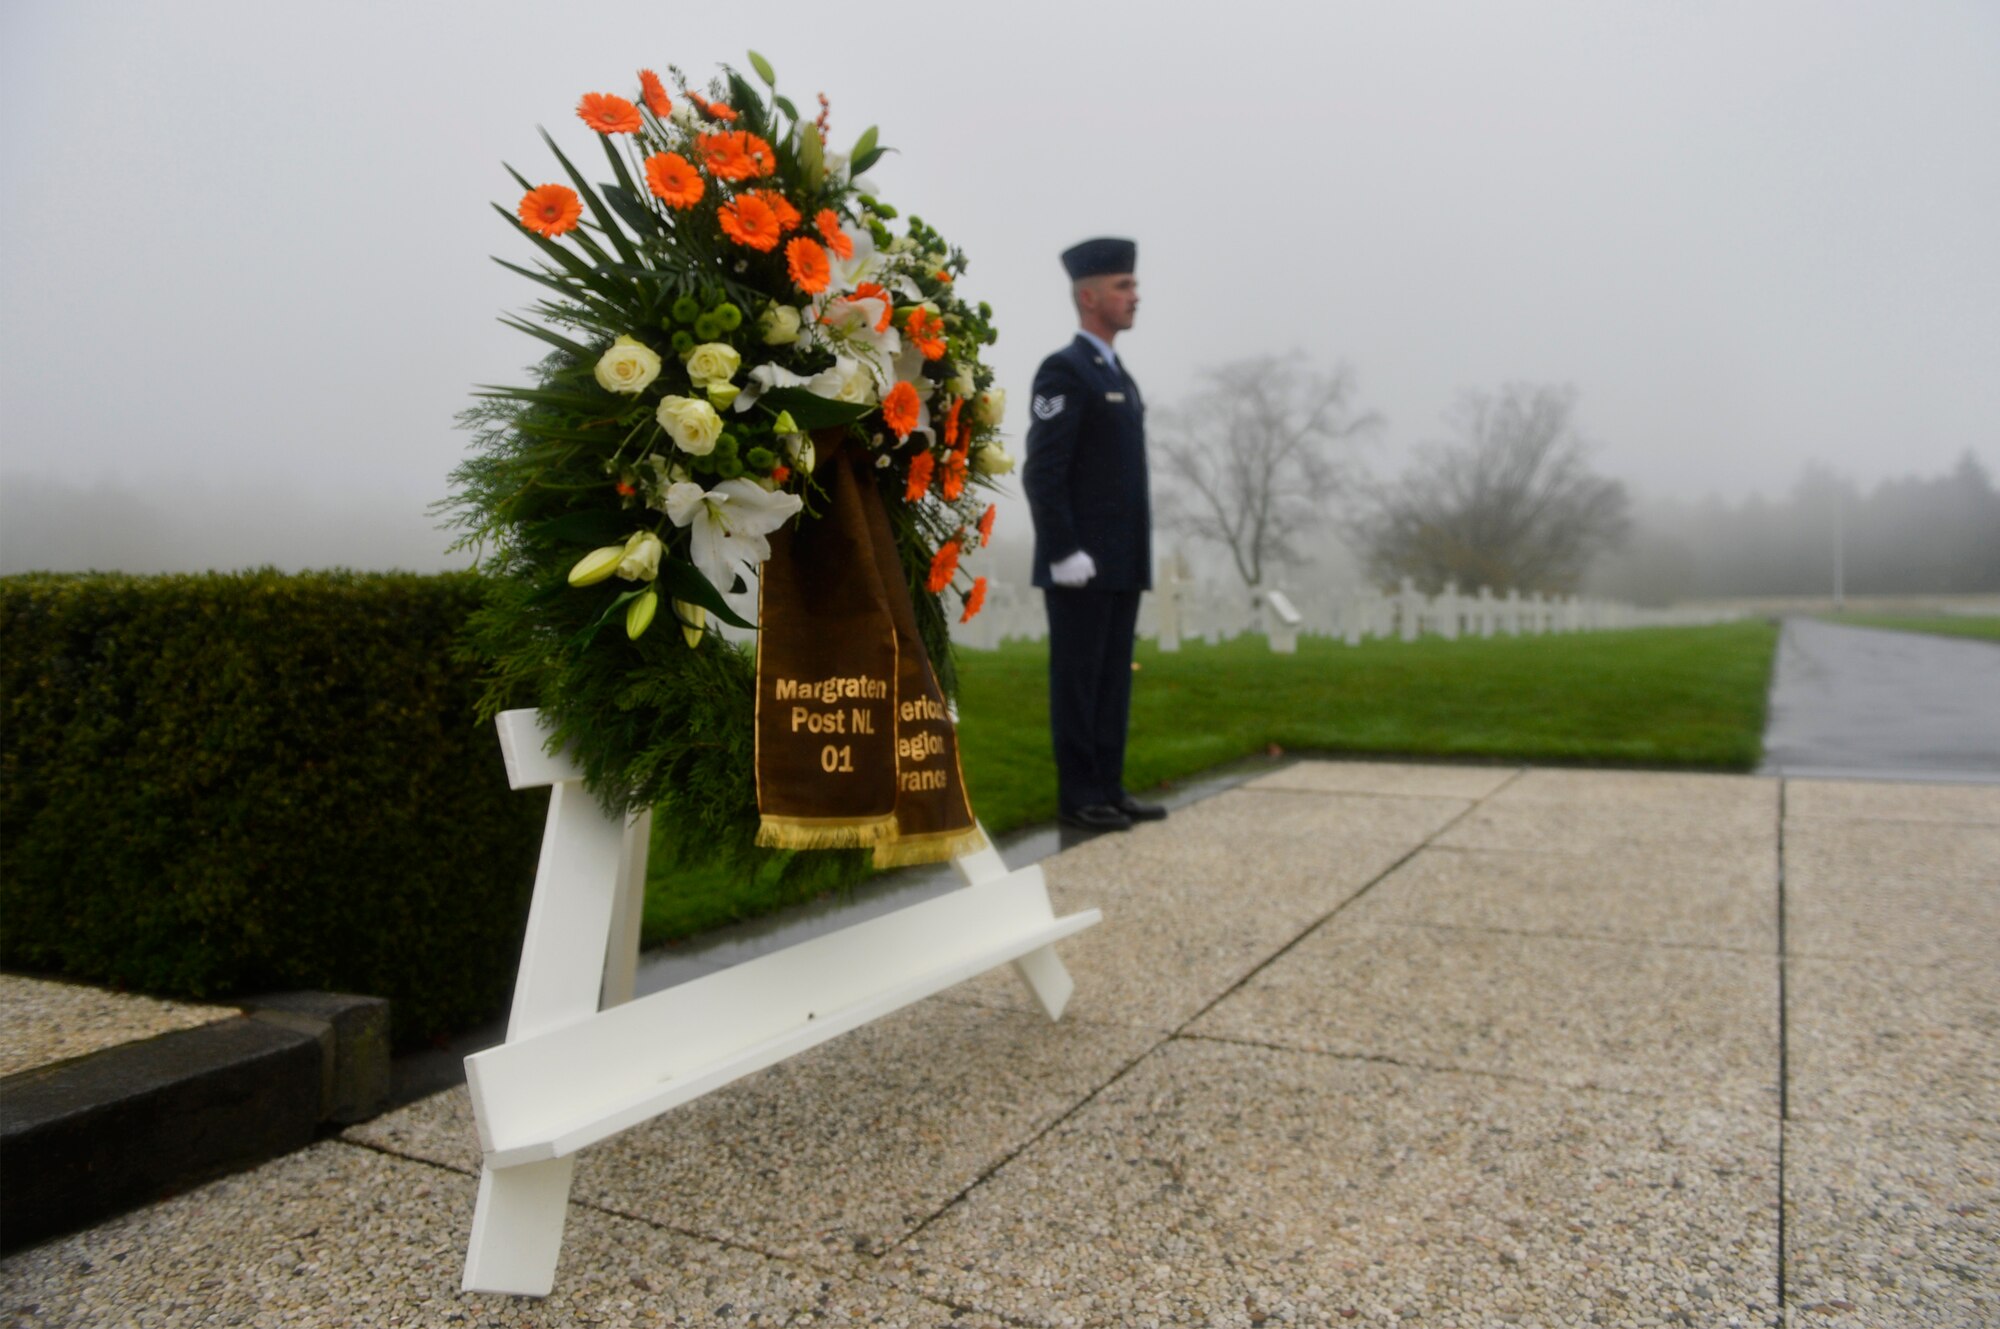 A wreath is displayed during a Veterans Day ceremony at Henri-Chapelle American Cemetery and Memorial, Belgium, Nov. 11, 2017. The event was attended by both U.S. and Belgian civilians as well as members of the American Legion. (U.S. Air Force photo by Airman 1st Class Joshua Magbanua)